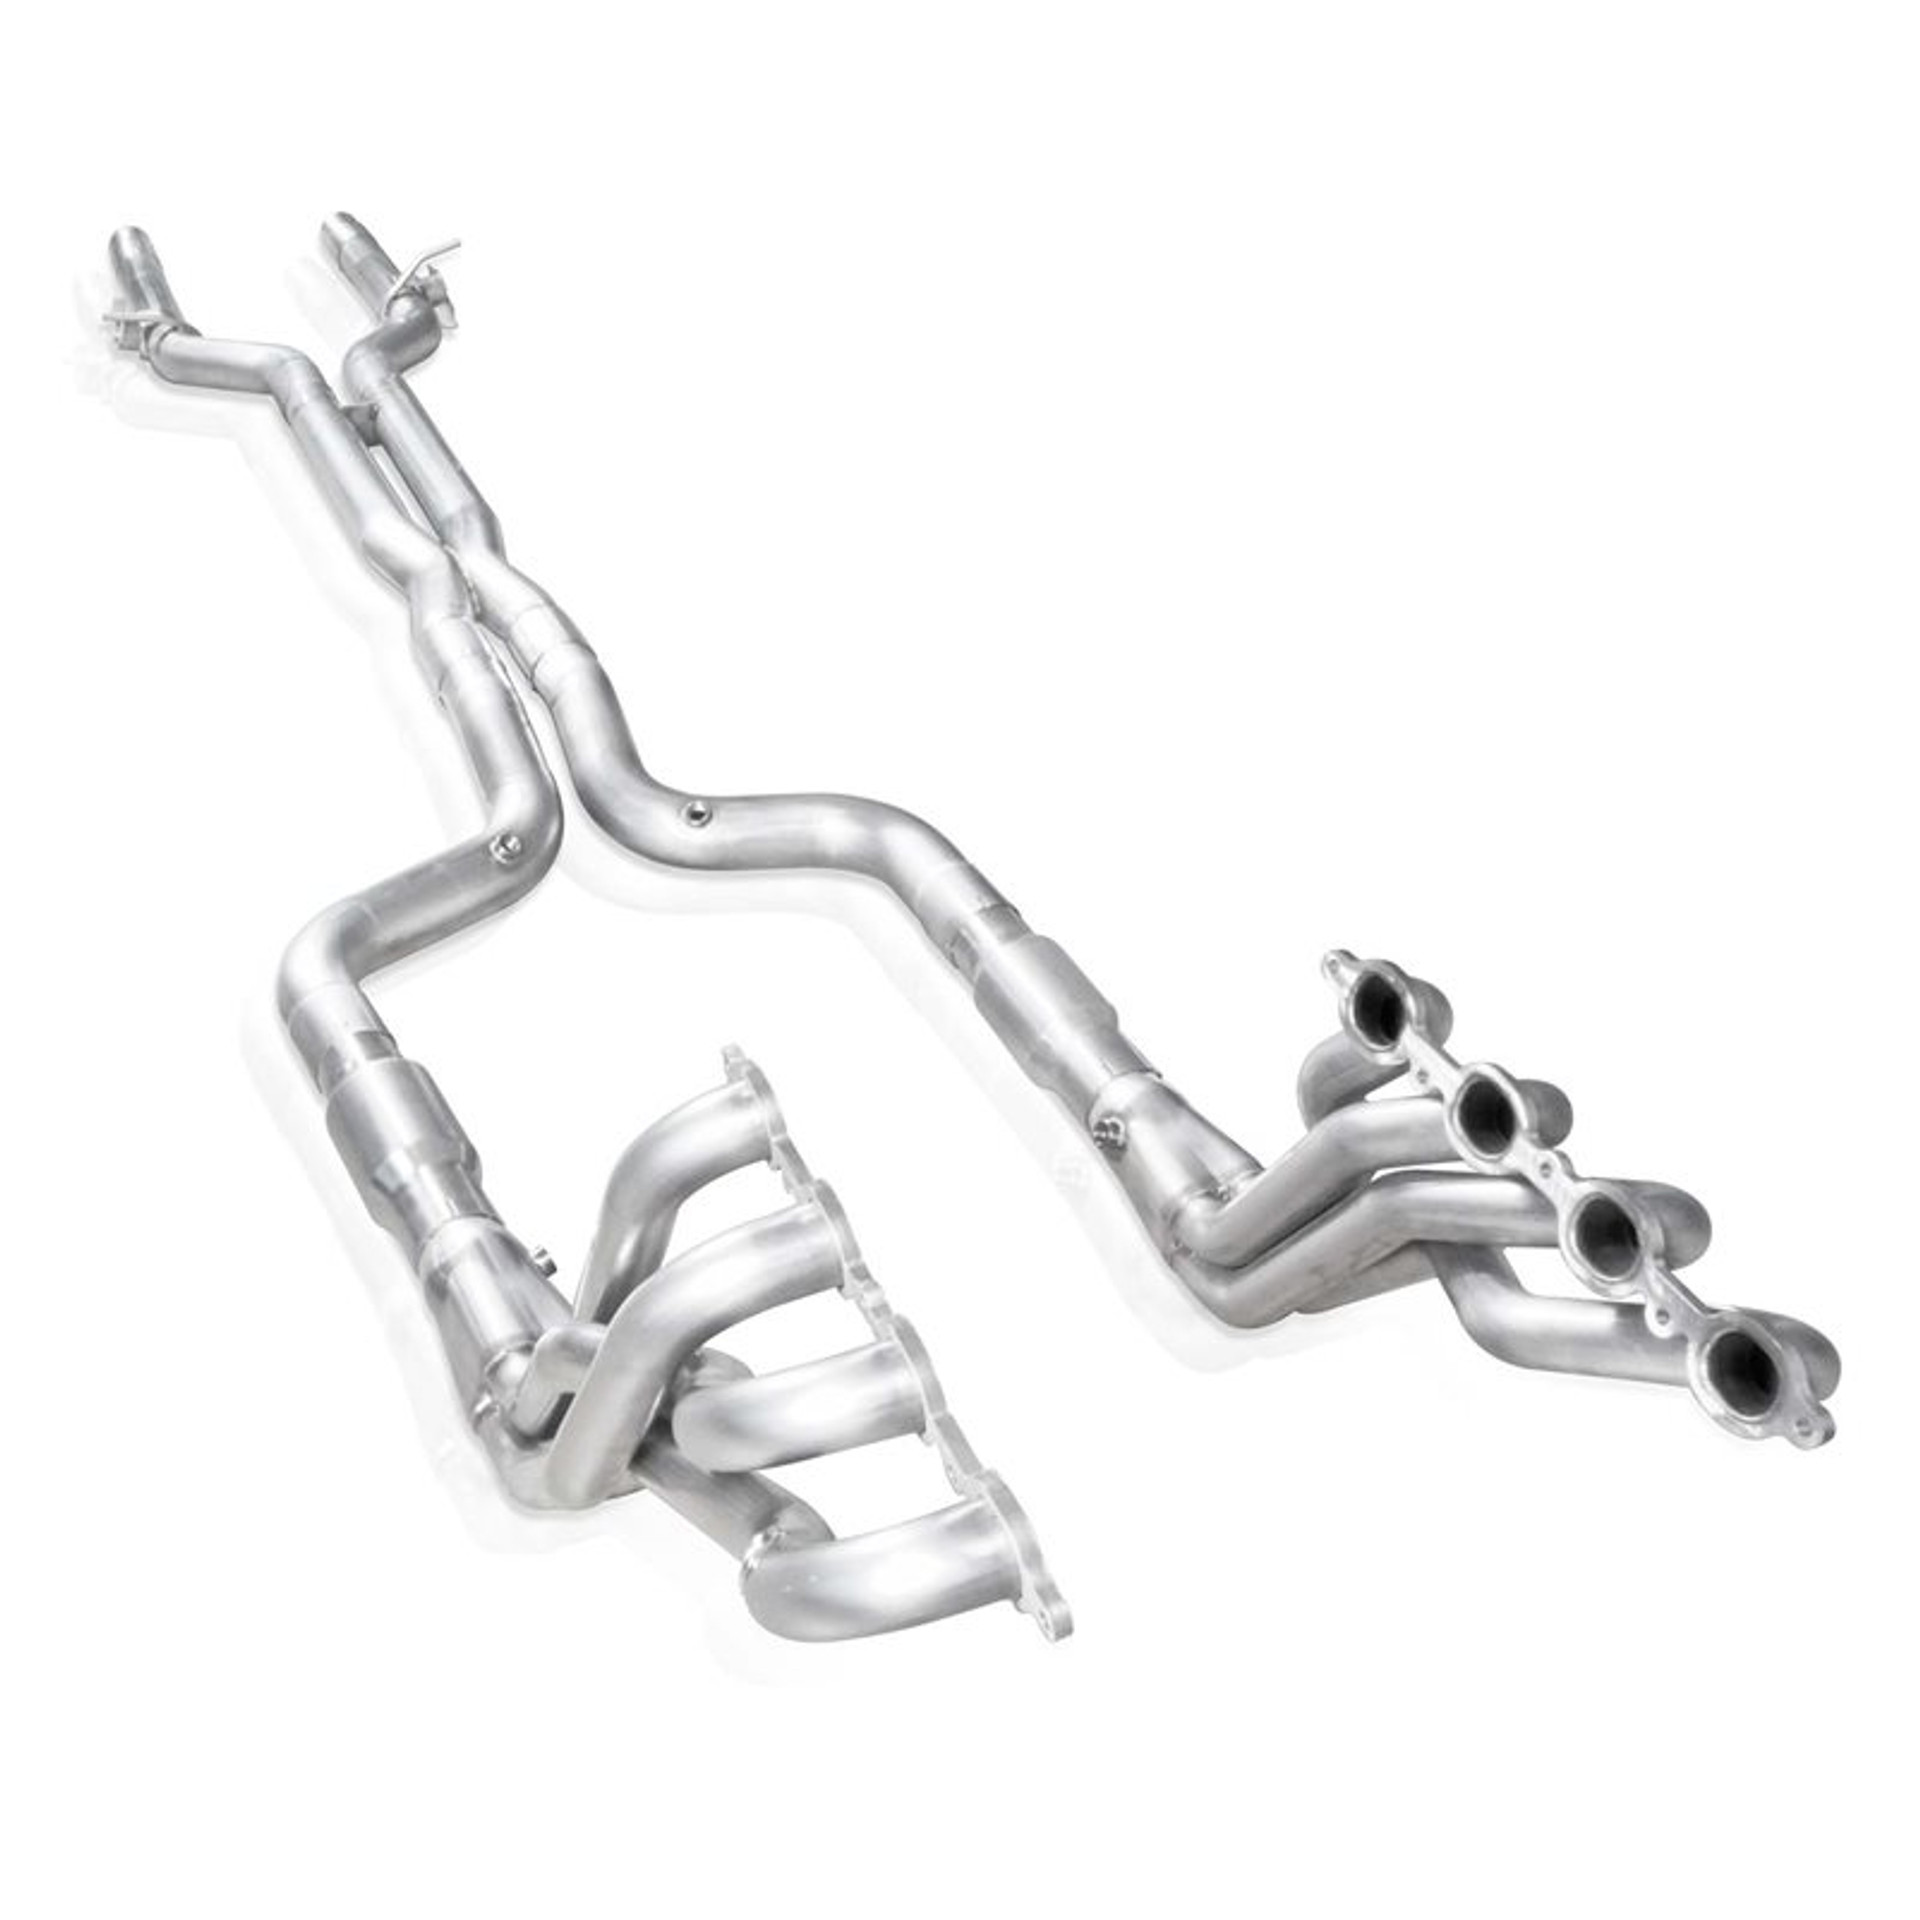 Stainless Works 1 7/8" Long Tube Headers, Natural Finish